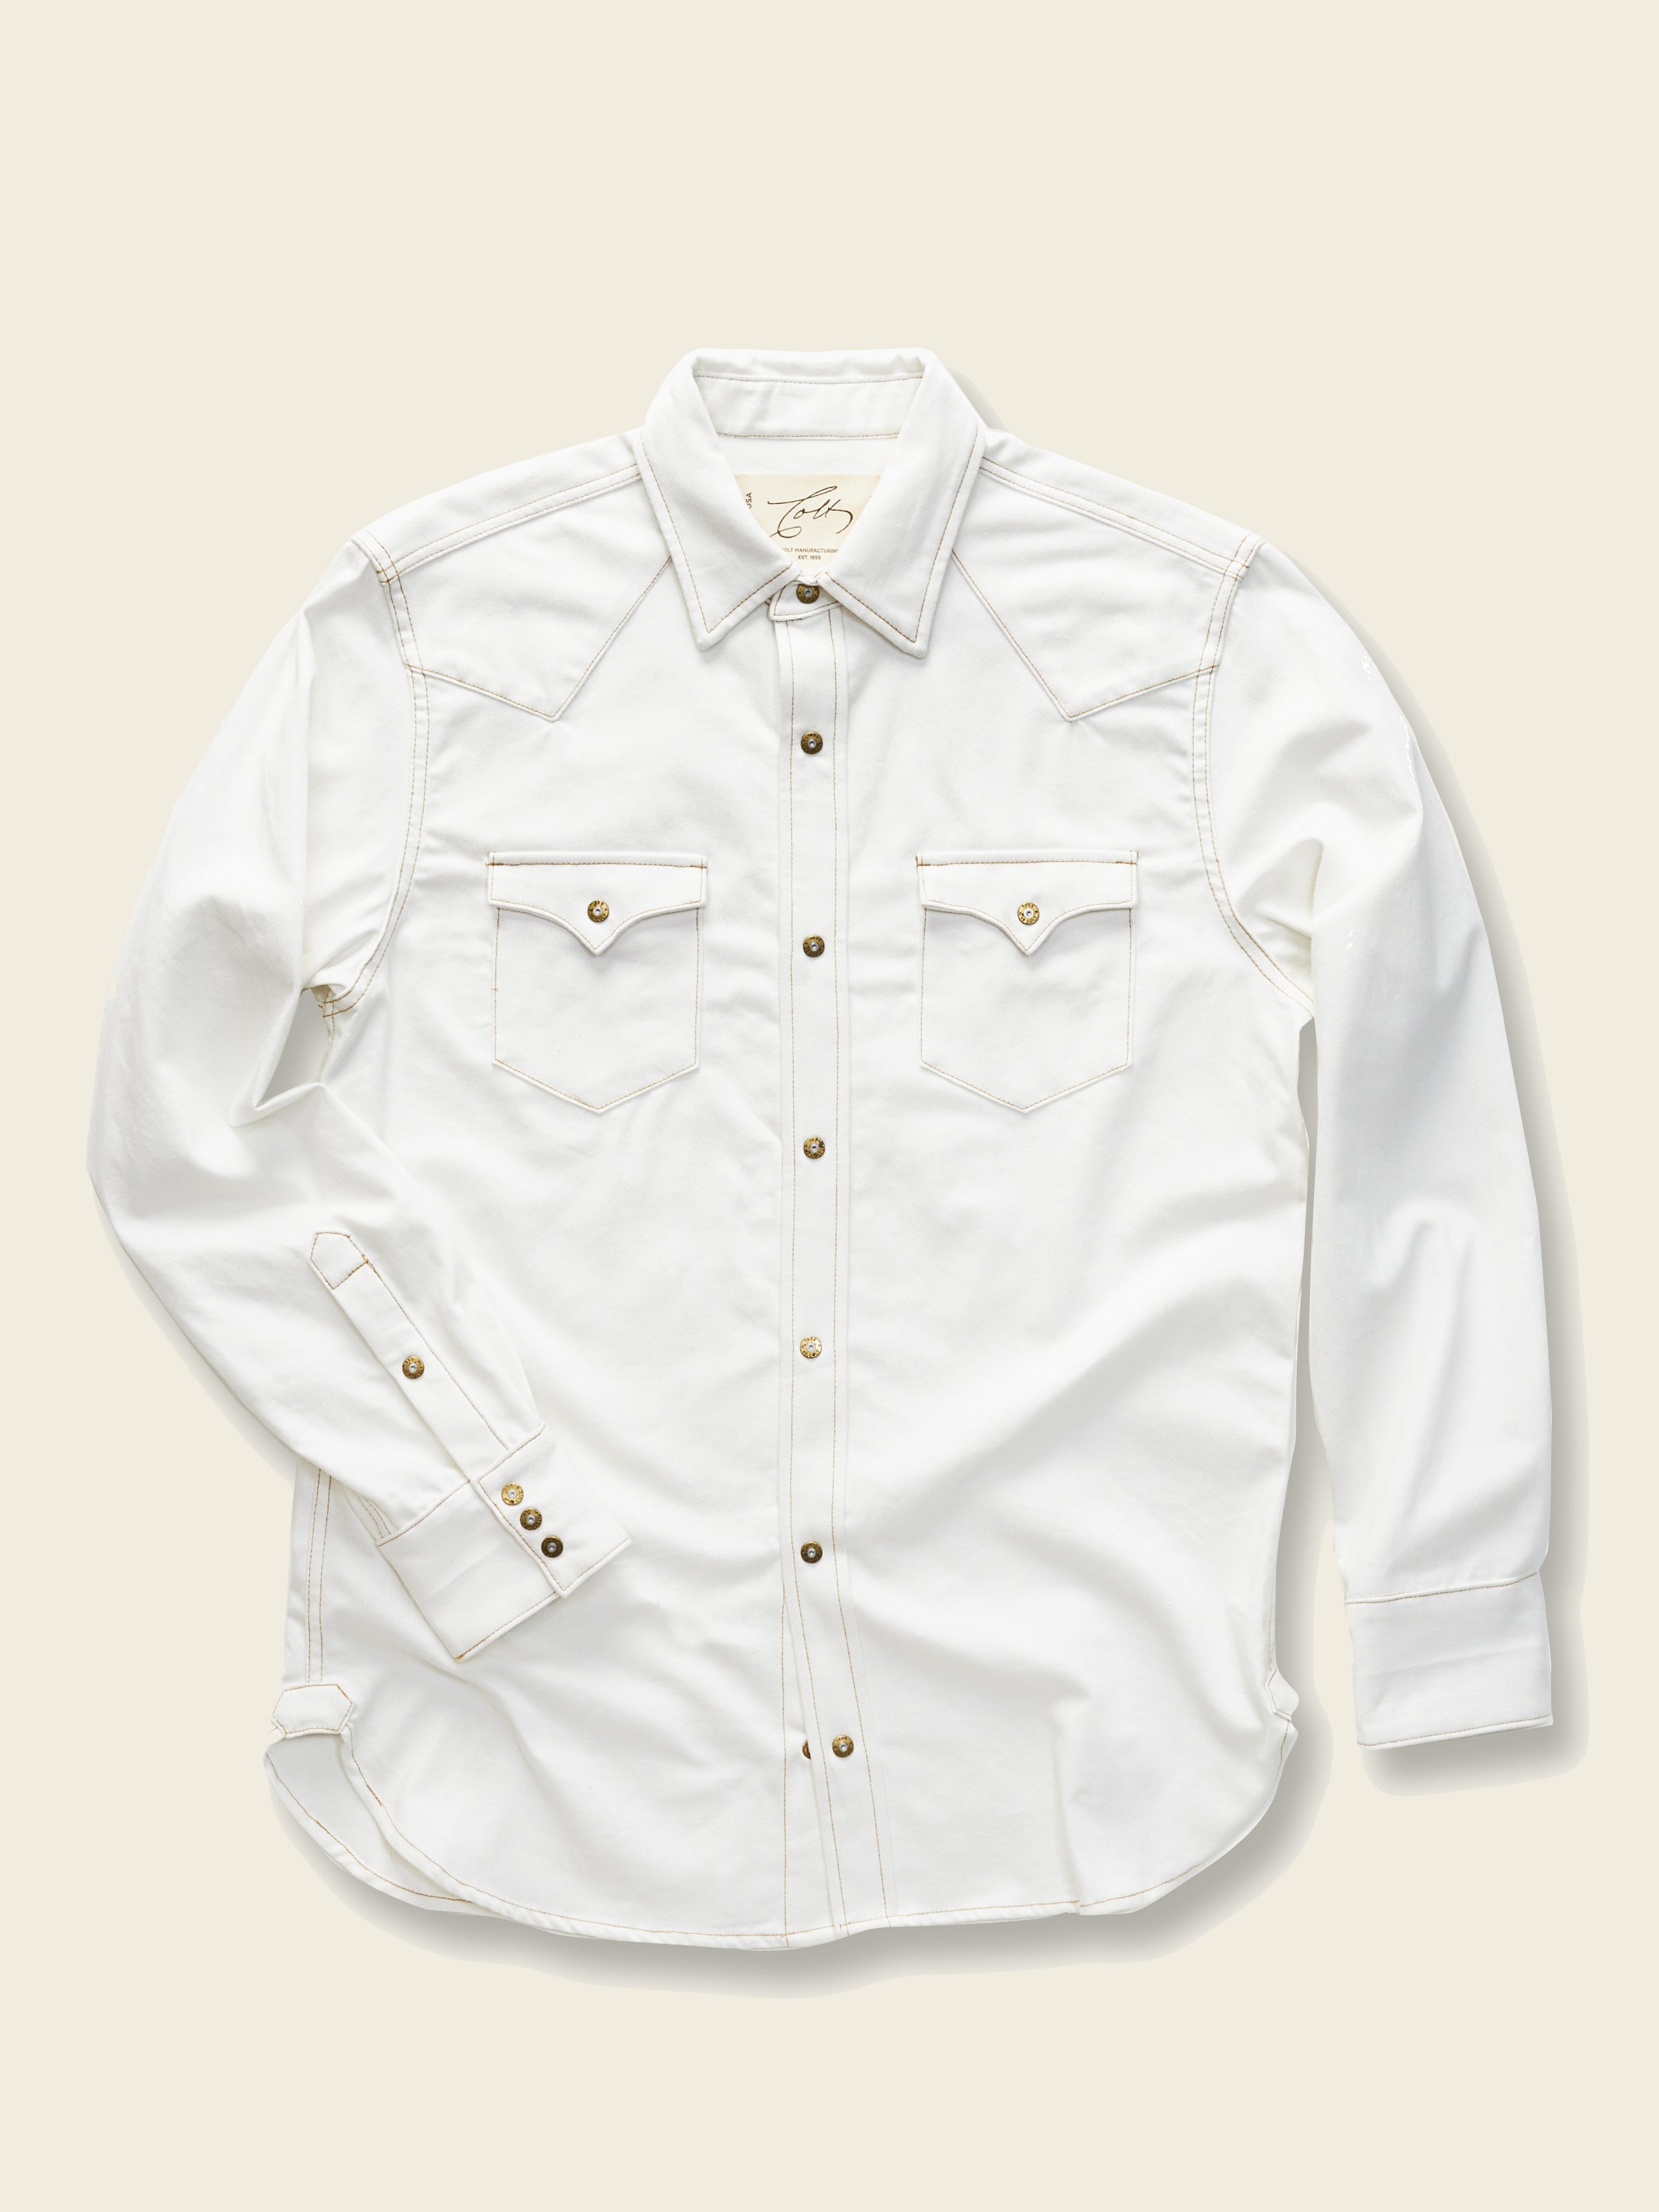 Western Shirt in Pure White